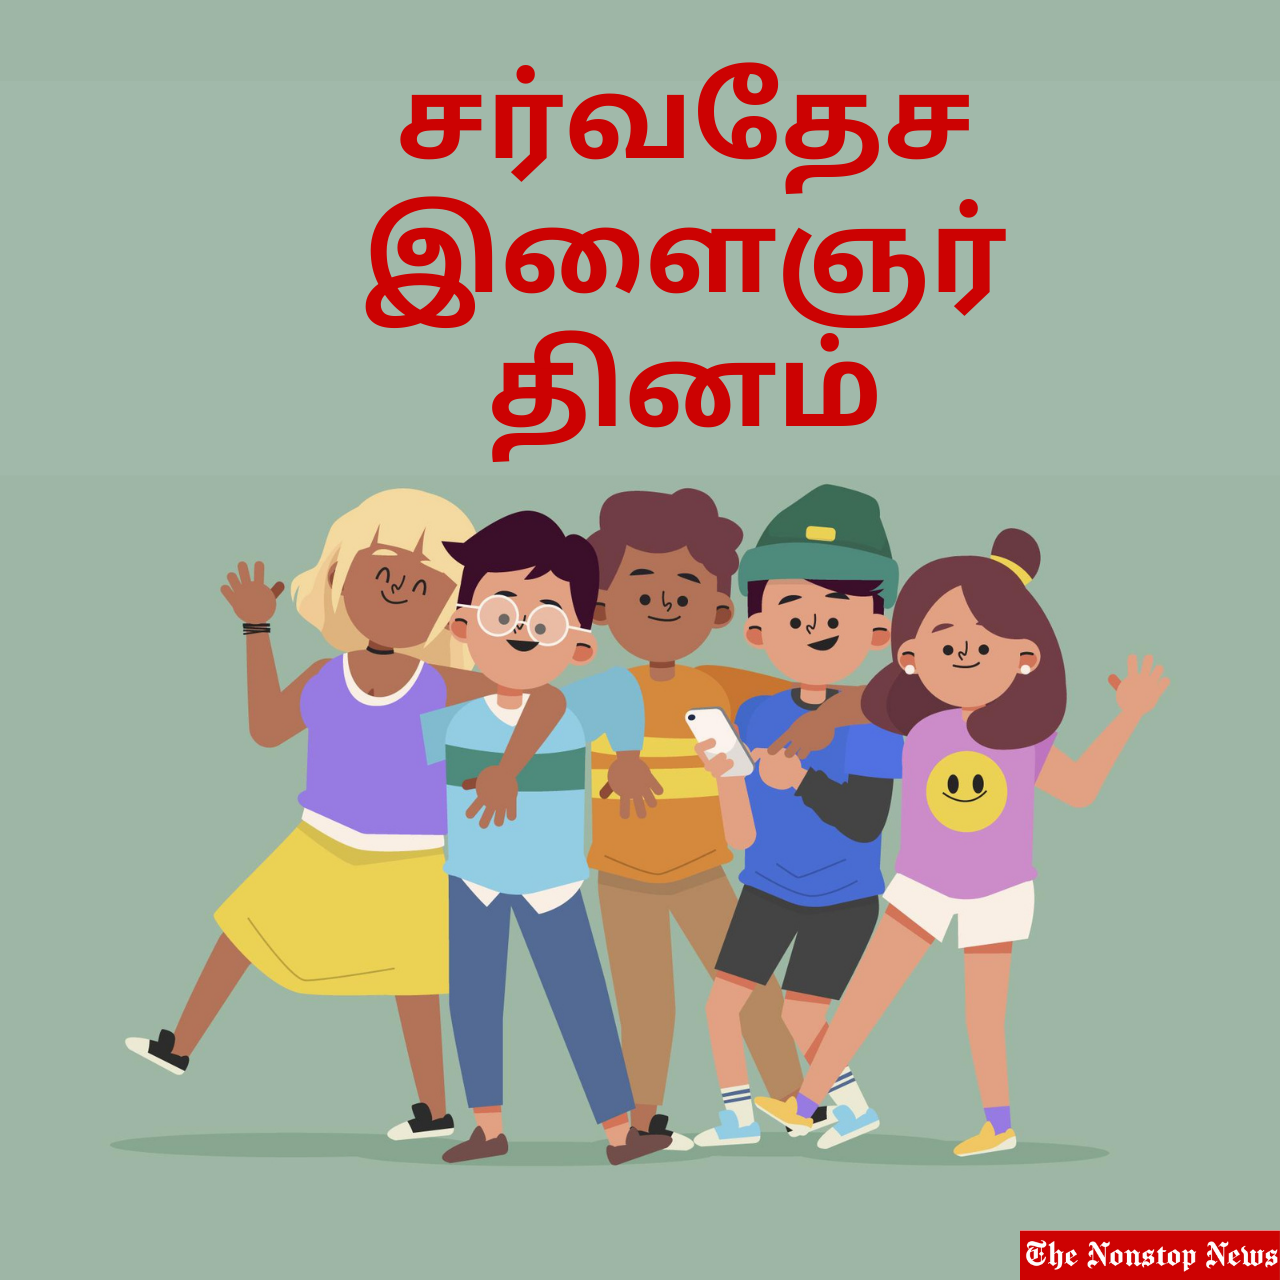 International Youth Day 2021 Tamil Wishes, Quotes, Poster, Messages, Greetings, Status, and HD Images to Share